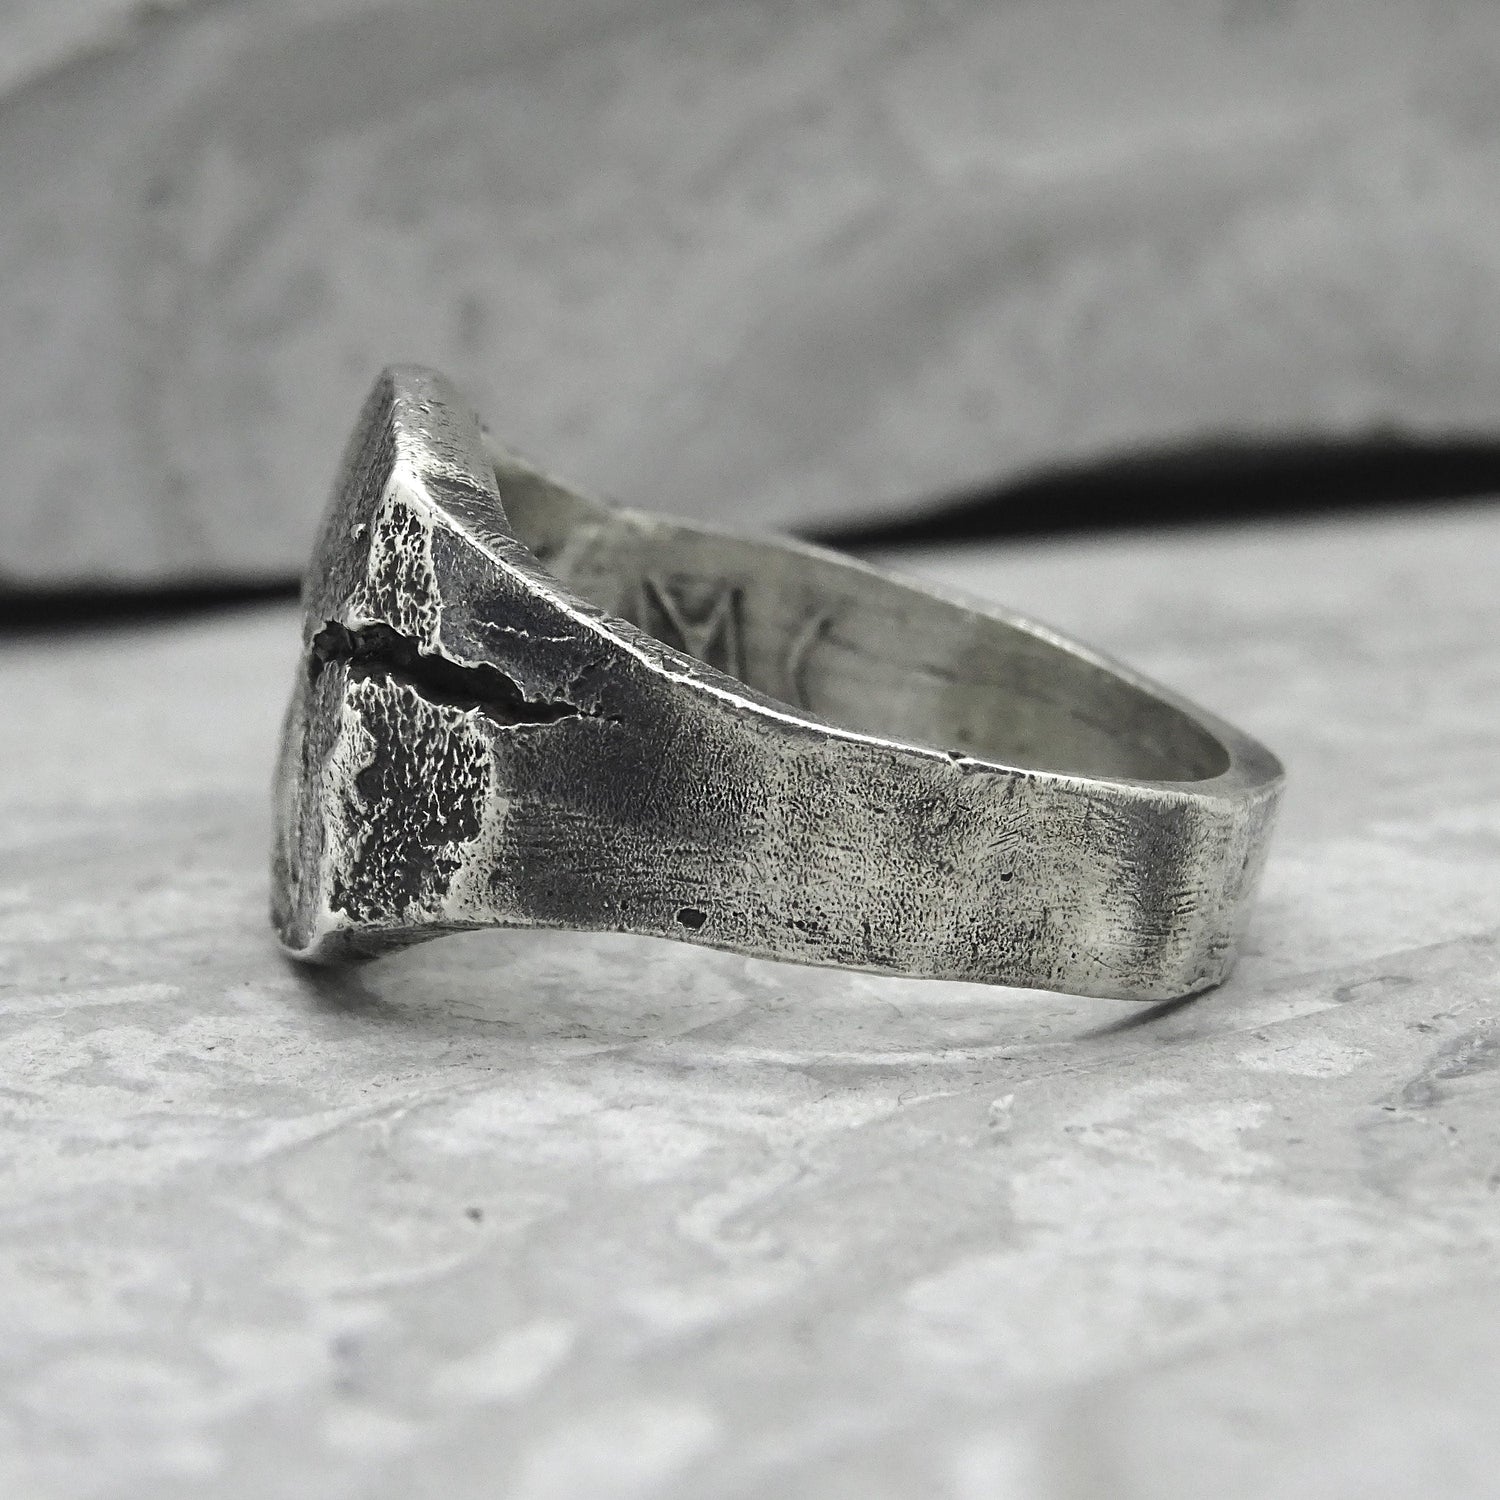 Fault ring - textured signet ring with a crack Signet rings Project50g 